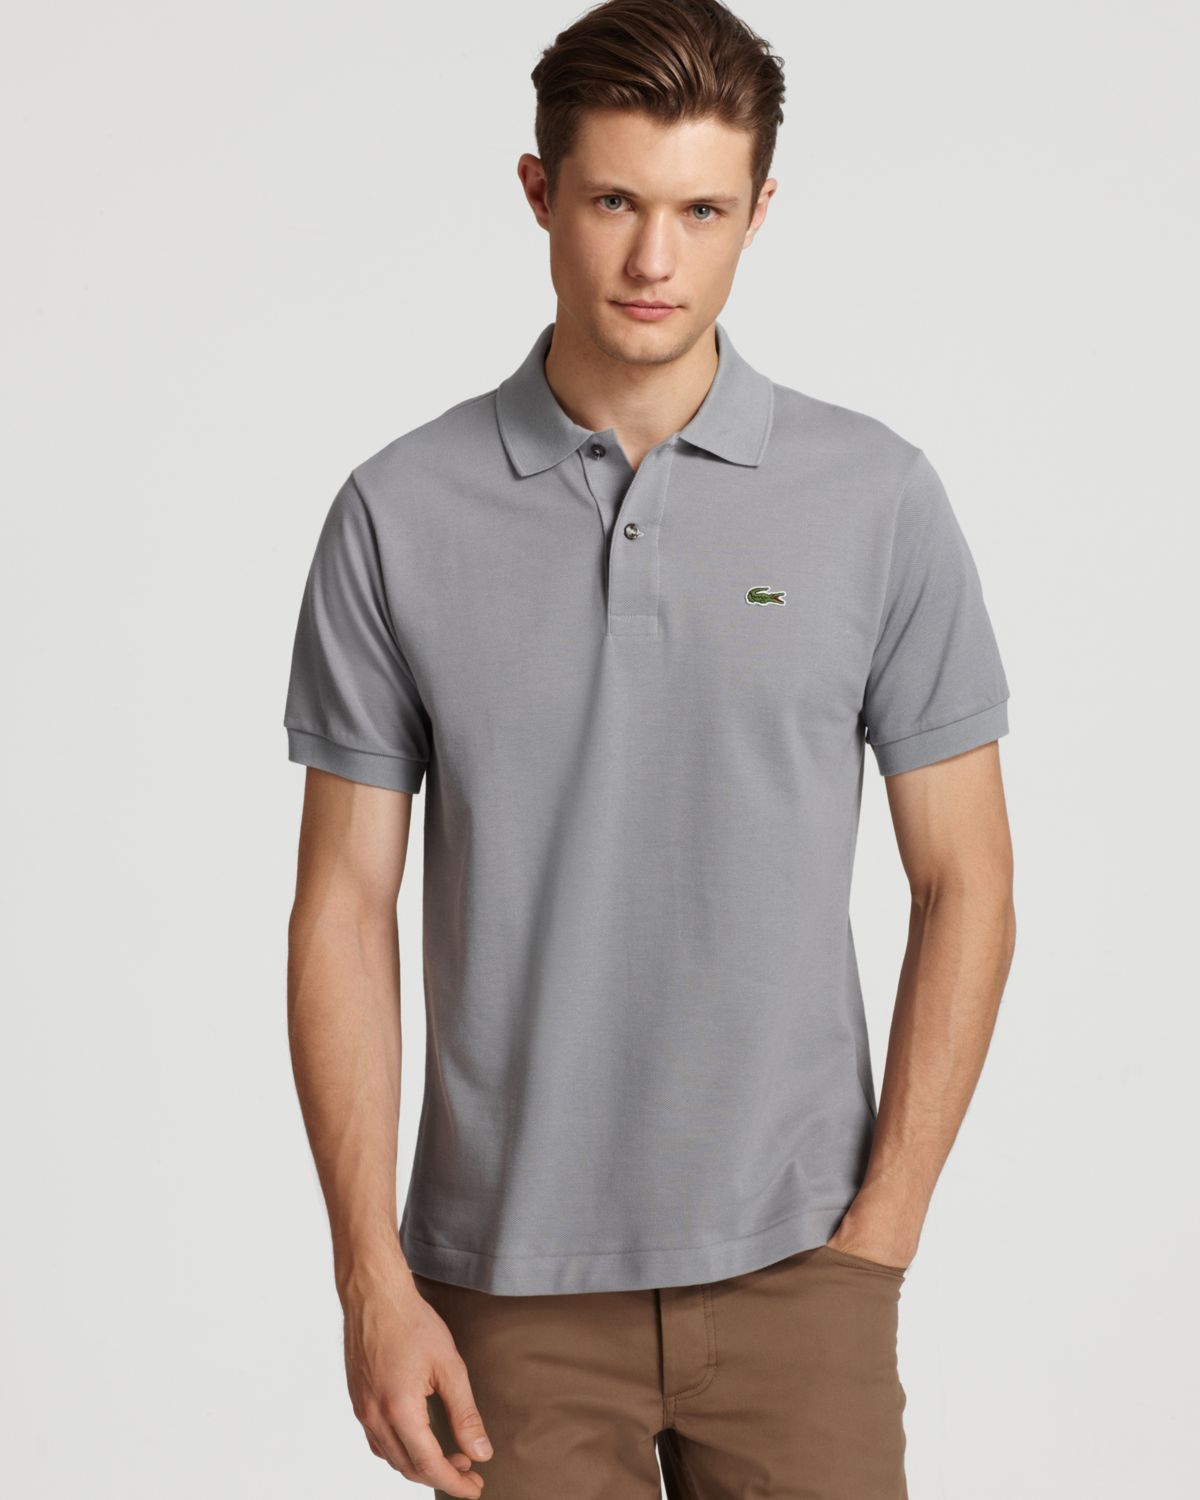 Lyst - Lacoste Classic Short Sleeve Piqué Polo Shirt in Gray for Men